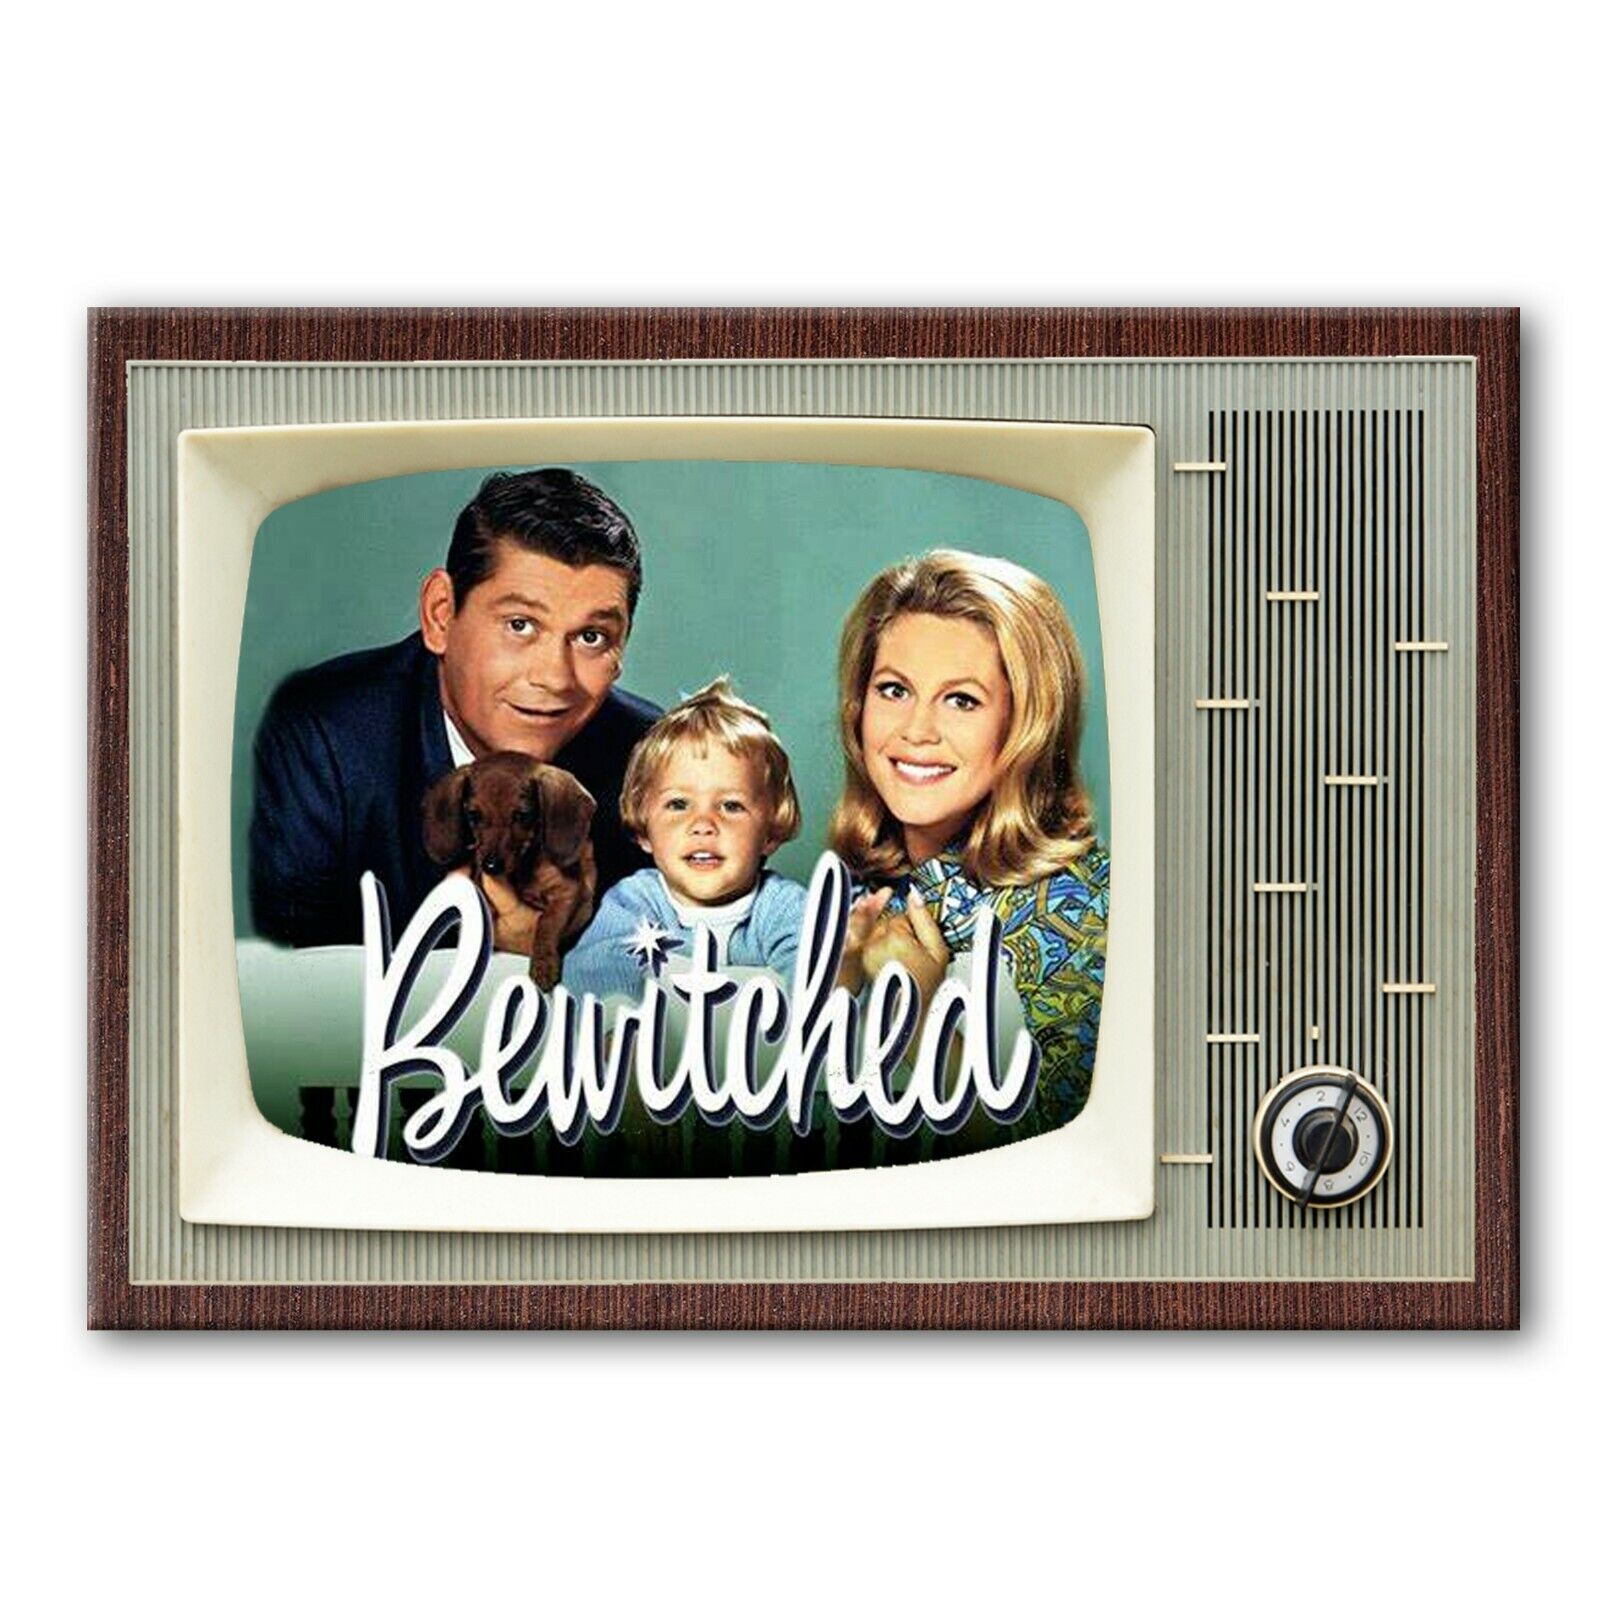 BEWITCHED Classic TV 3.5 inches x 2.5 inches Steel FRIDGE MAGNET